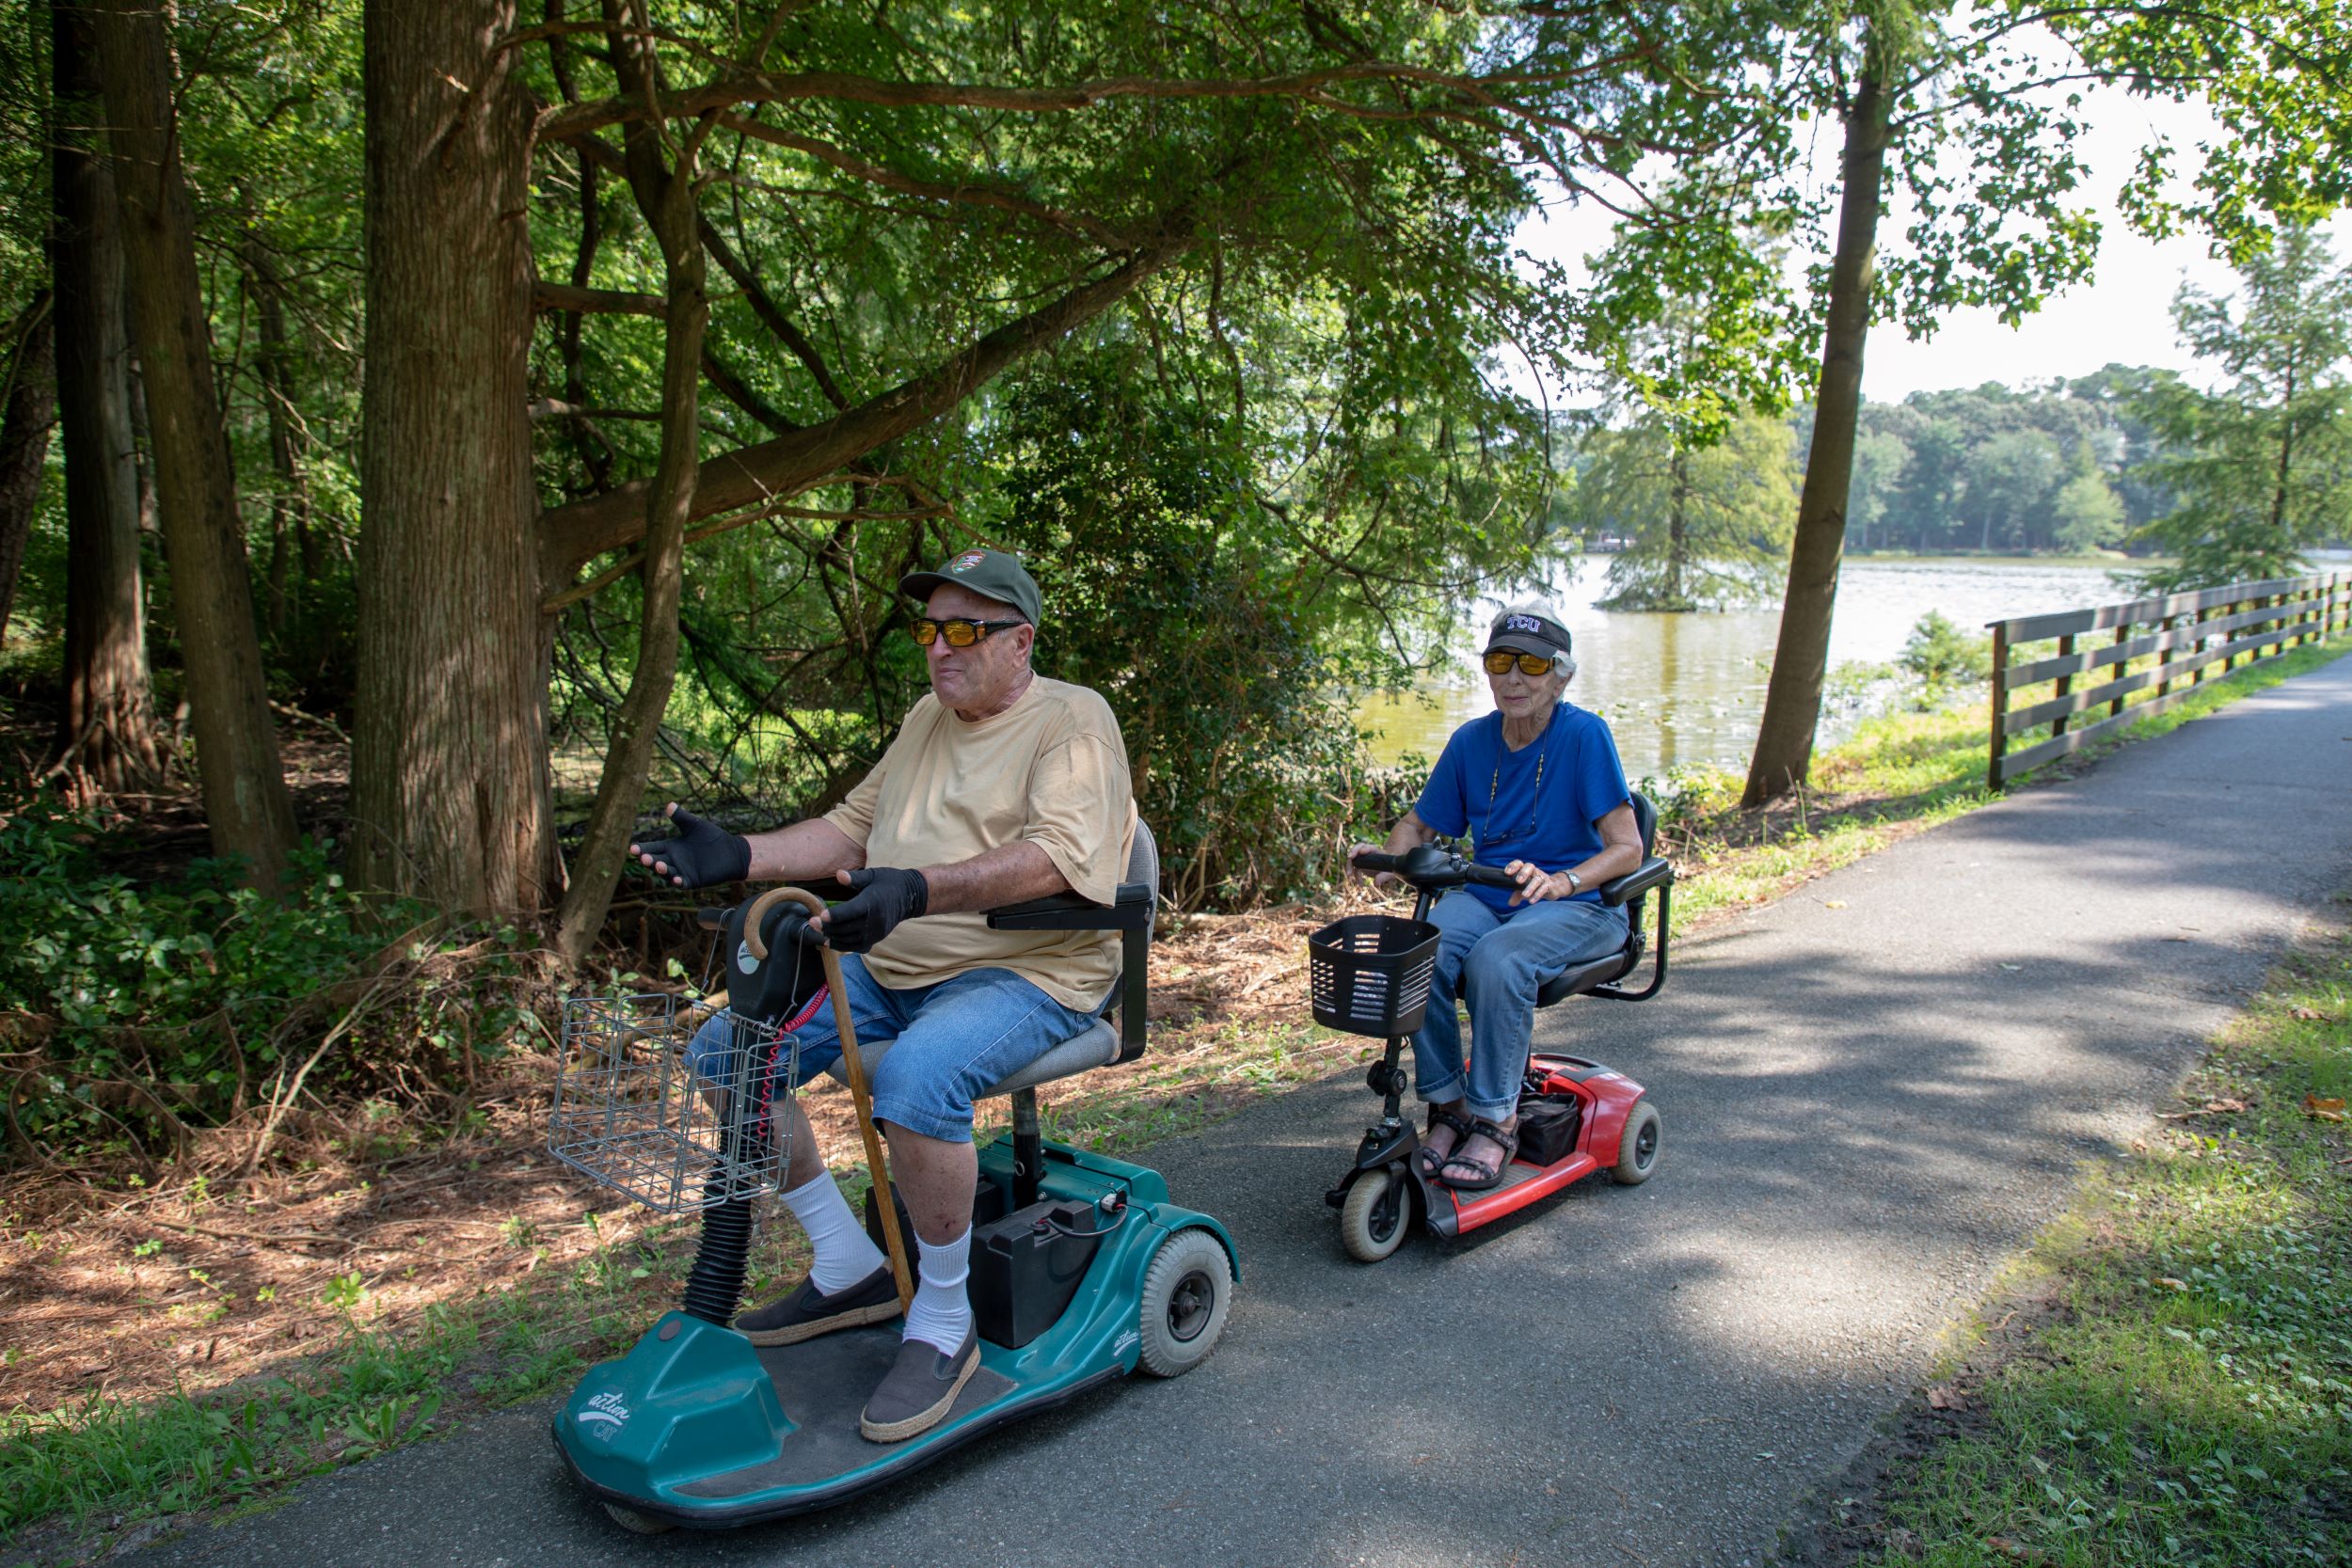 A couple on a trail at Trap Pond State Park using personal mobility scooters.